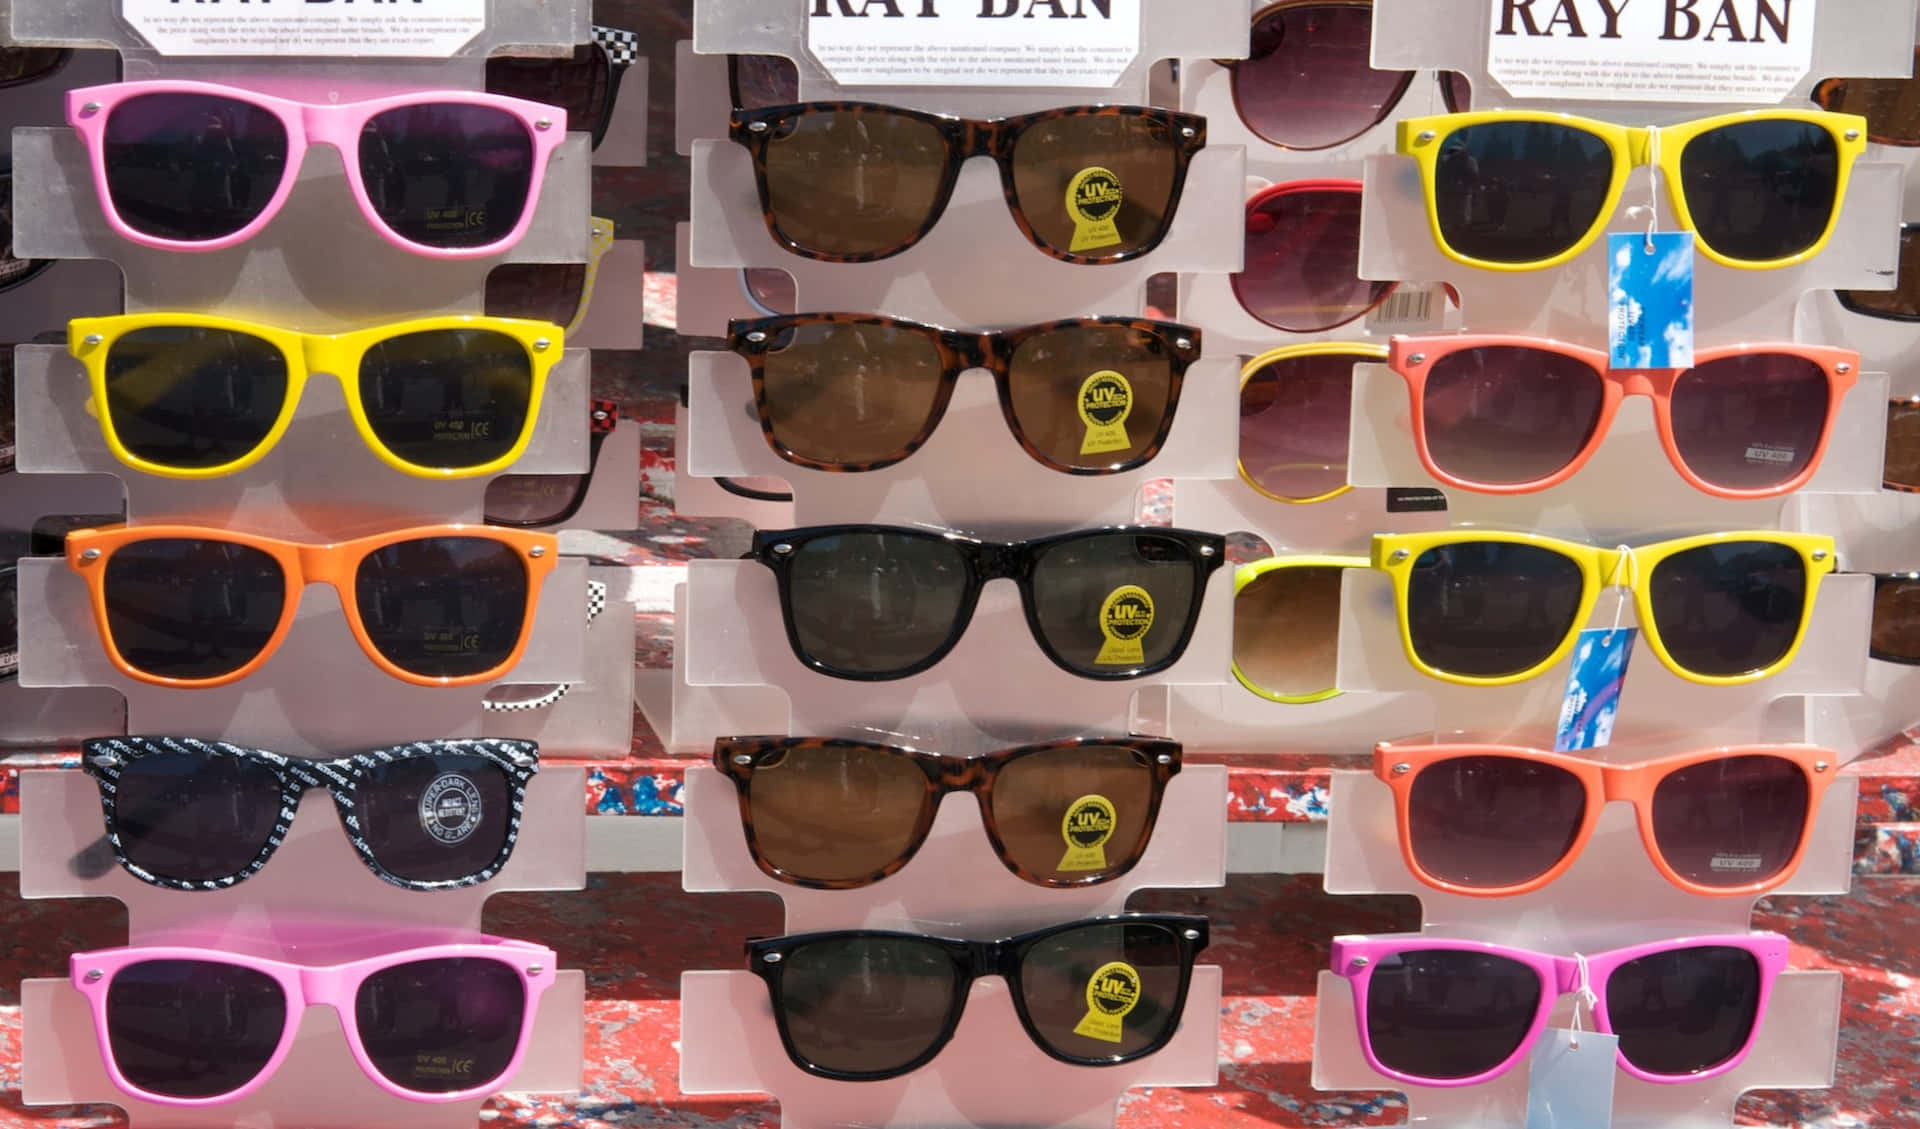 Get Noticed and Look Good - Sunglasses for Every Occasion